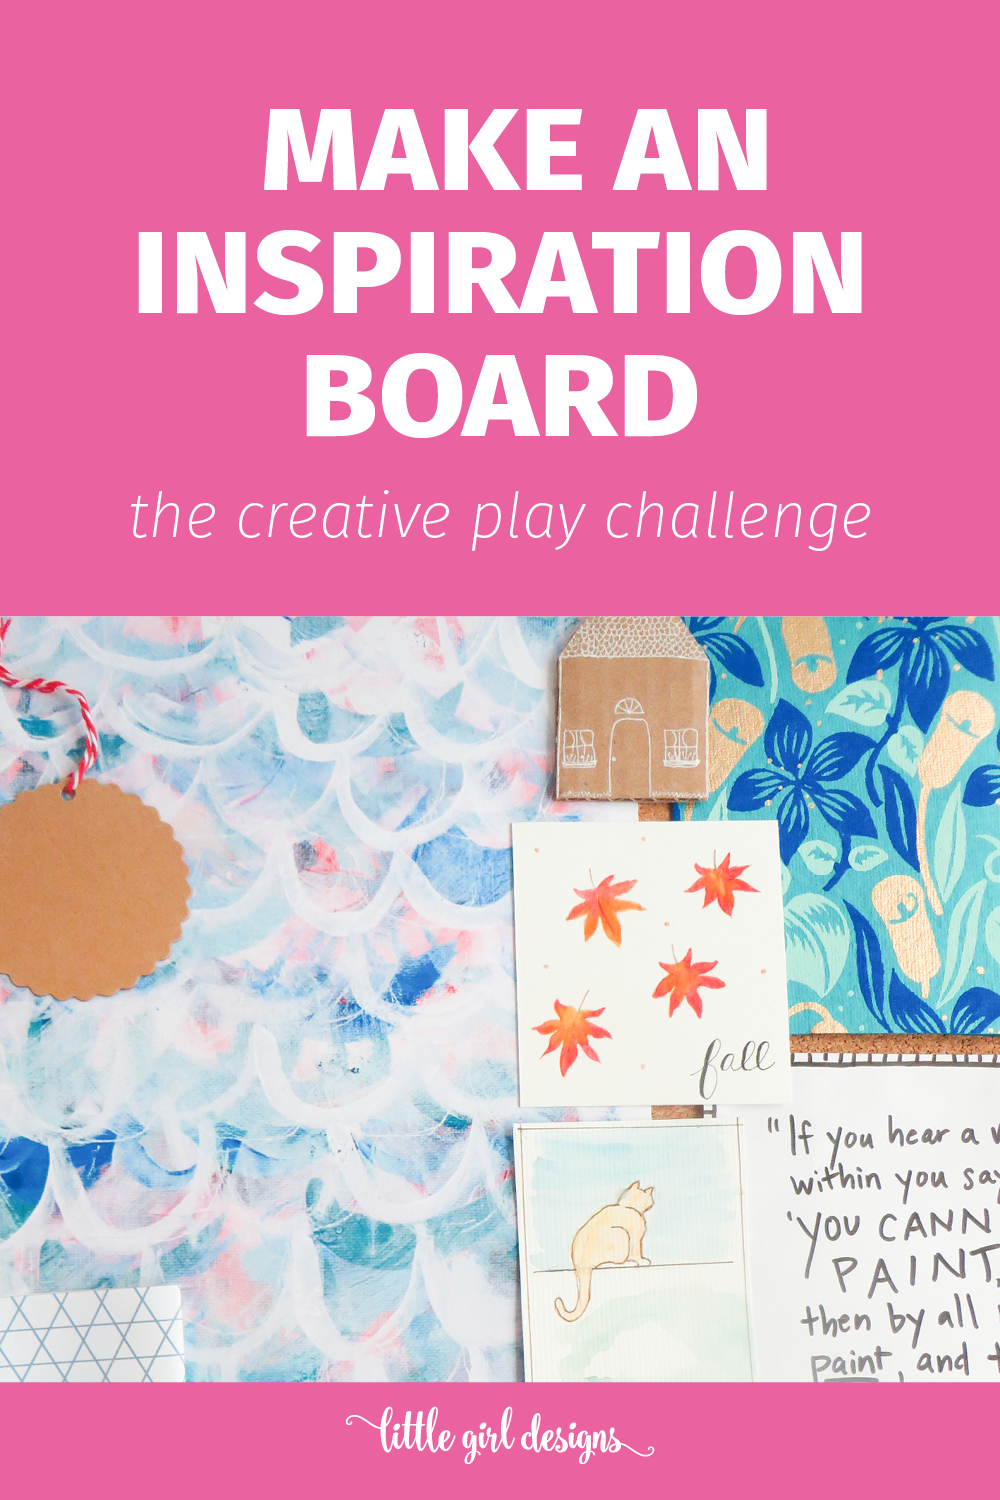 Gather your materials to make this DIY inspiration board. I love having one of these in my craft room and office as well as in my art journals.